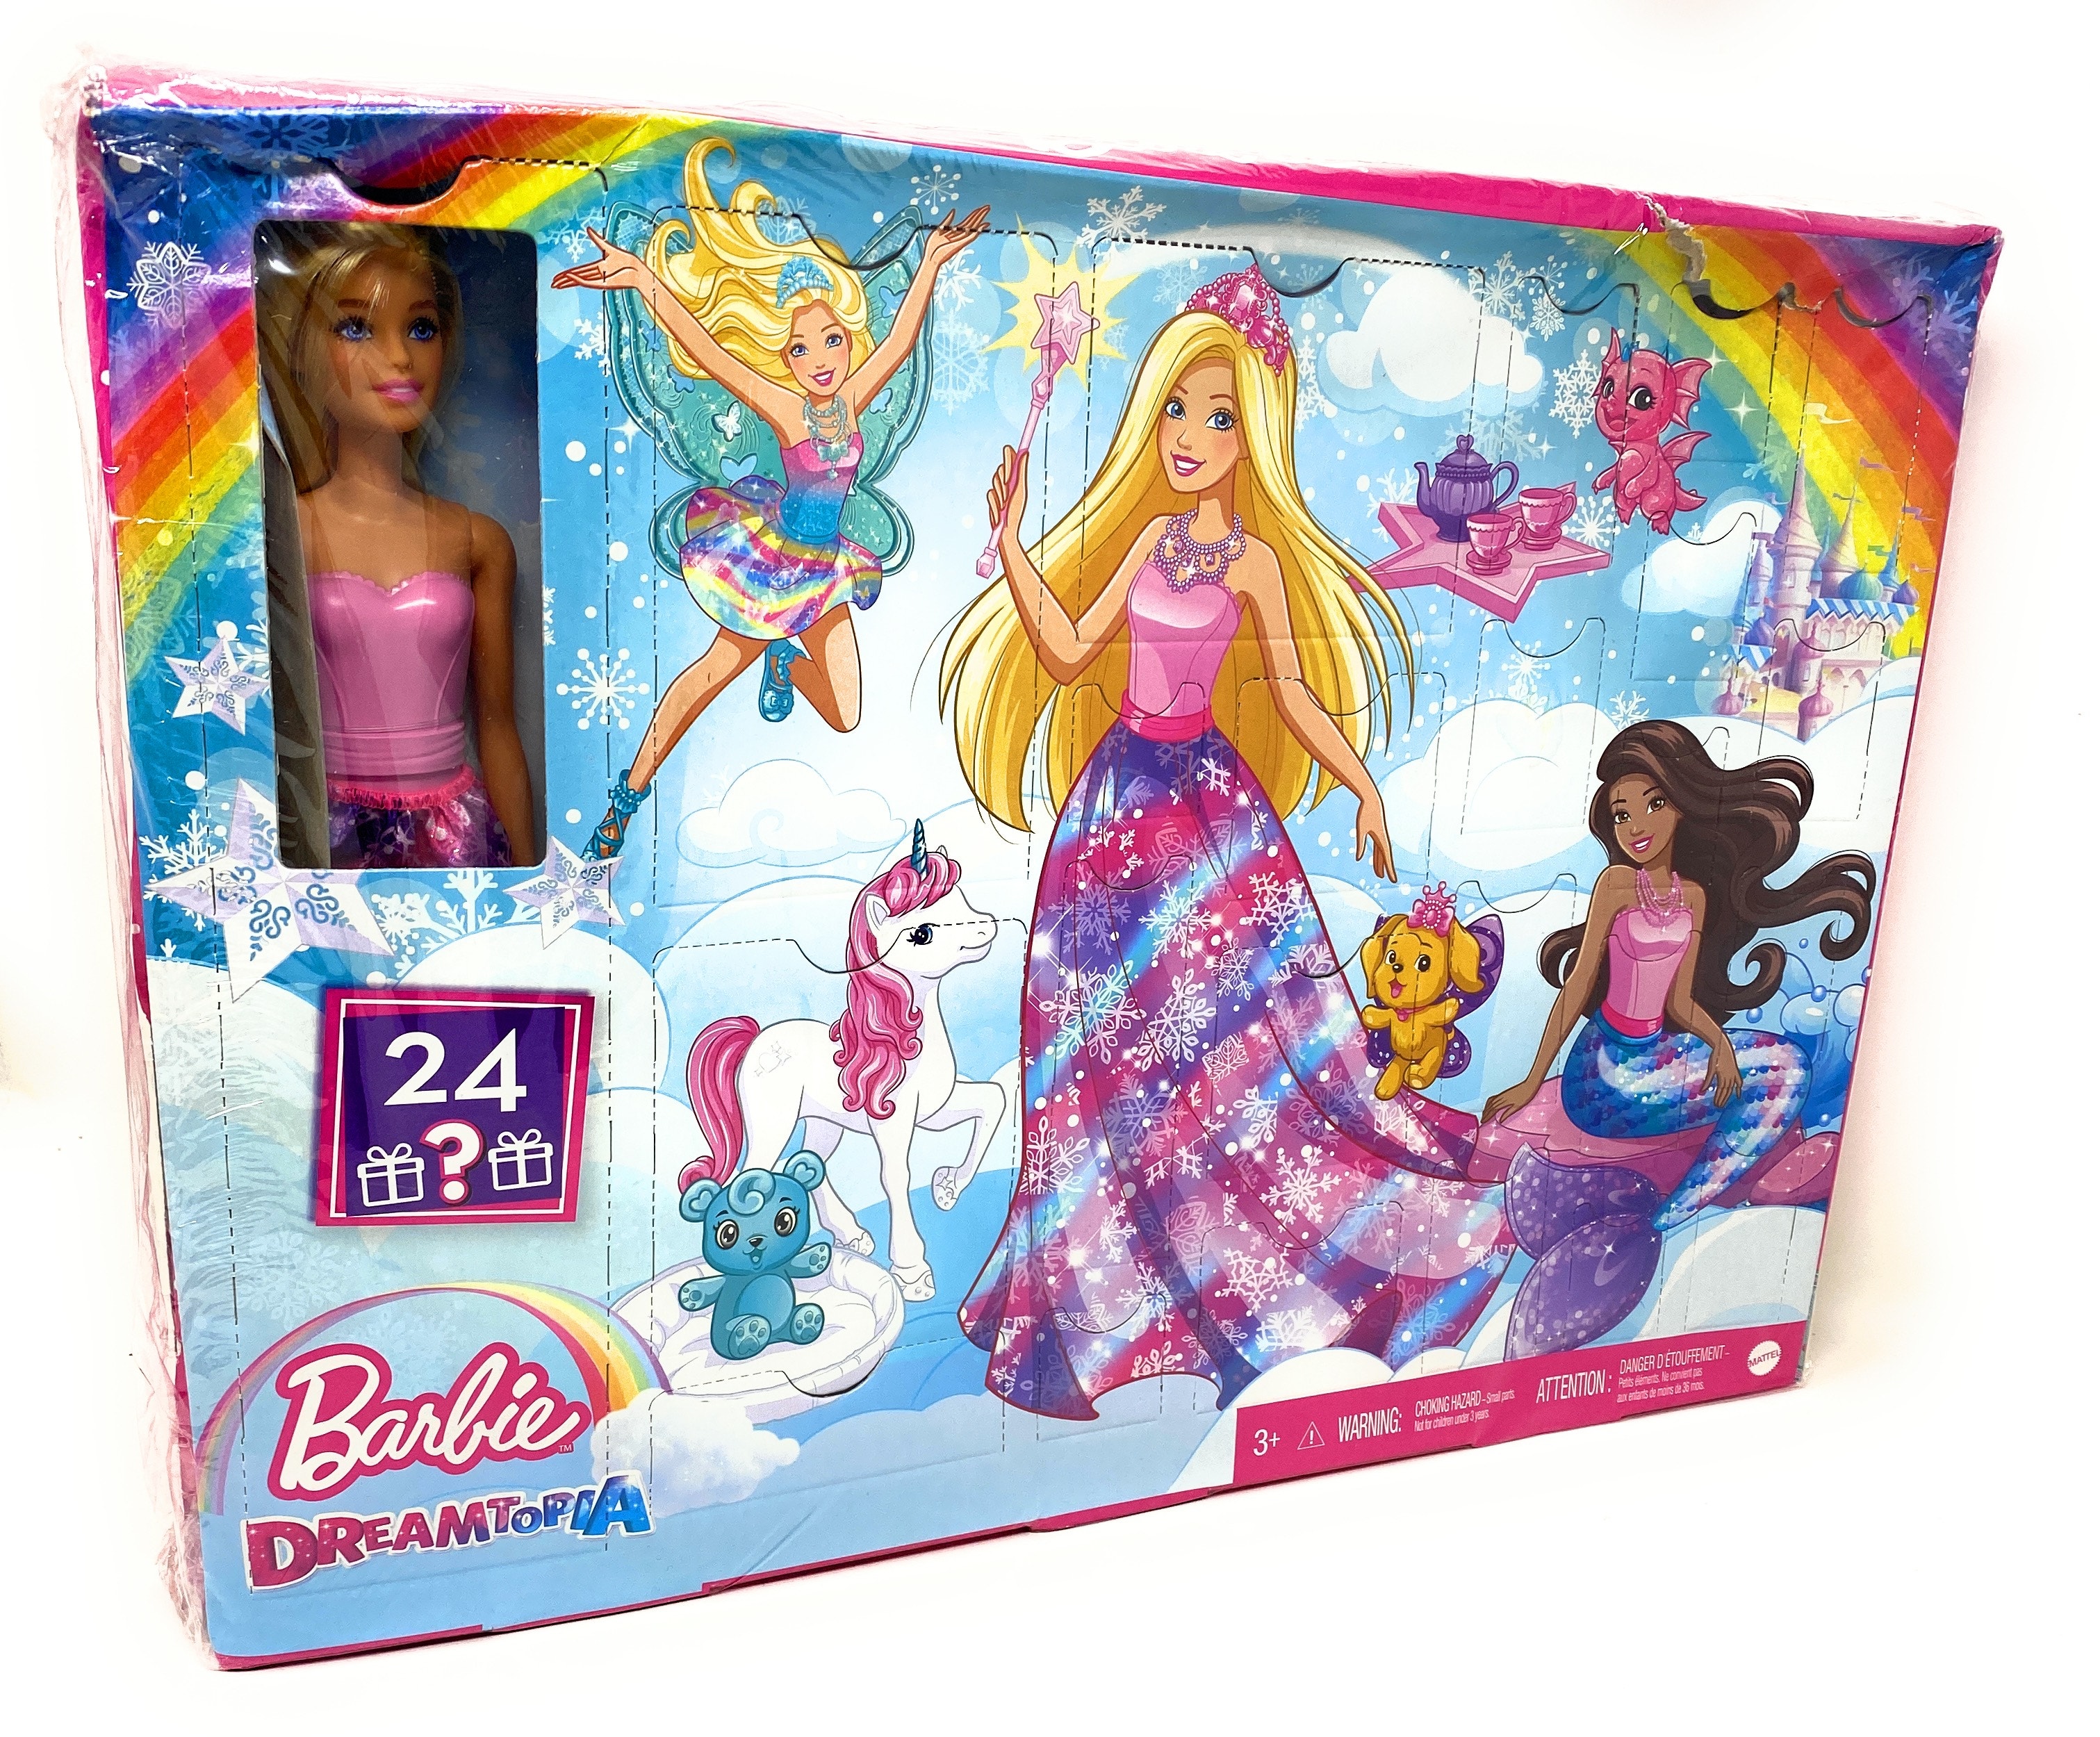 Barbie Dreamtopia Fairytale Surprise Box with Barbie Doll and 24 Gifts |